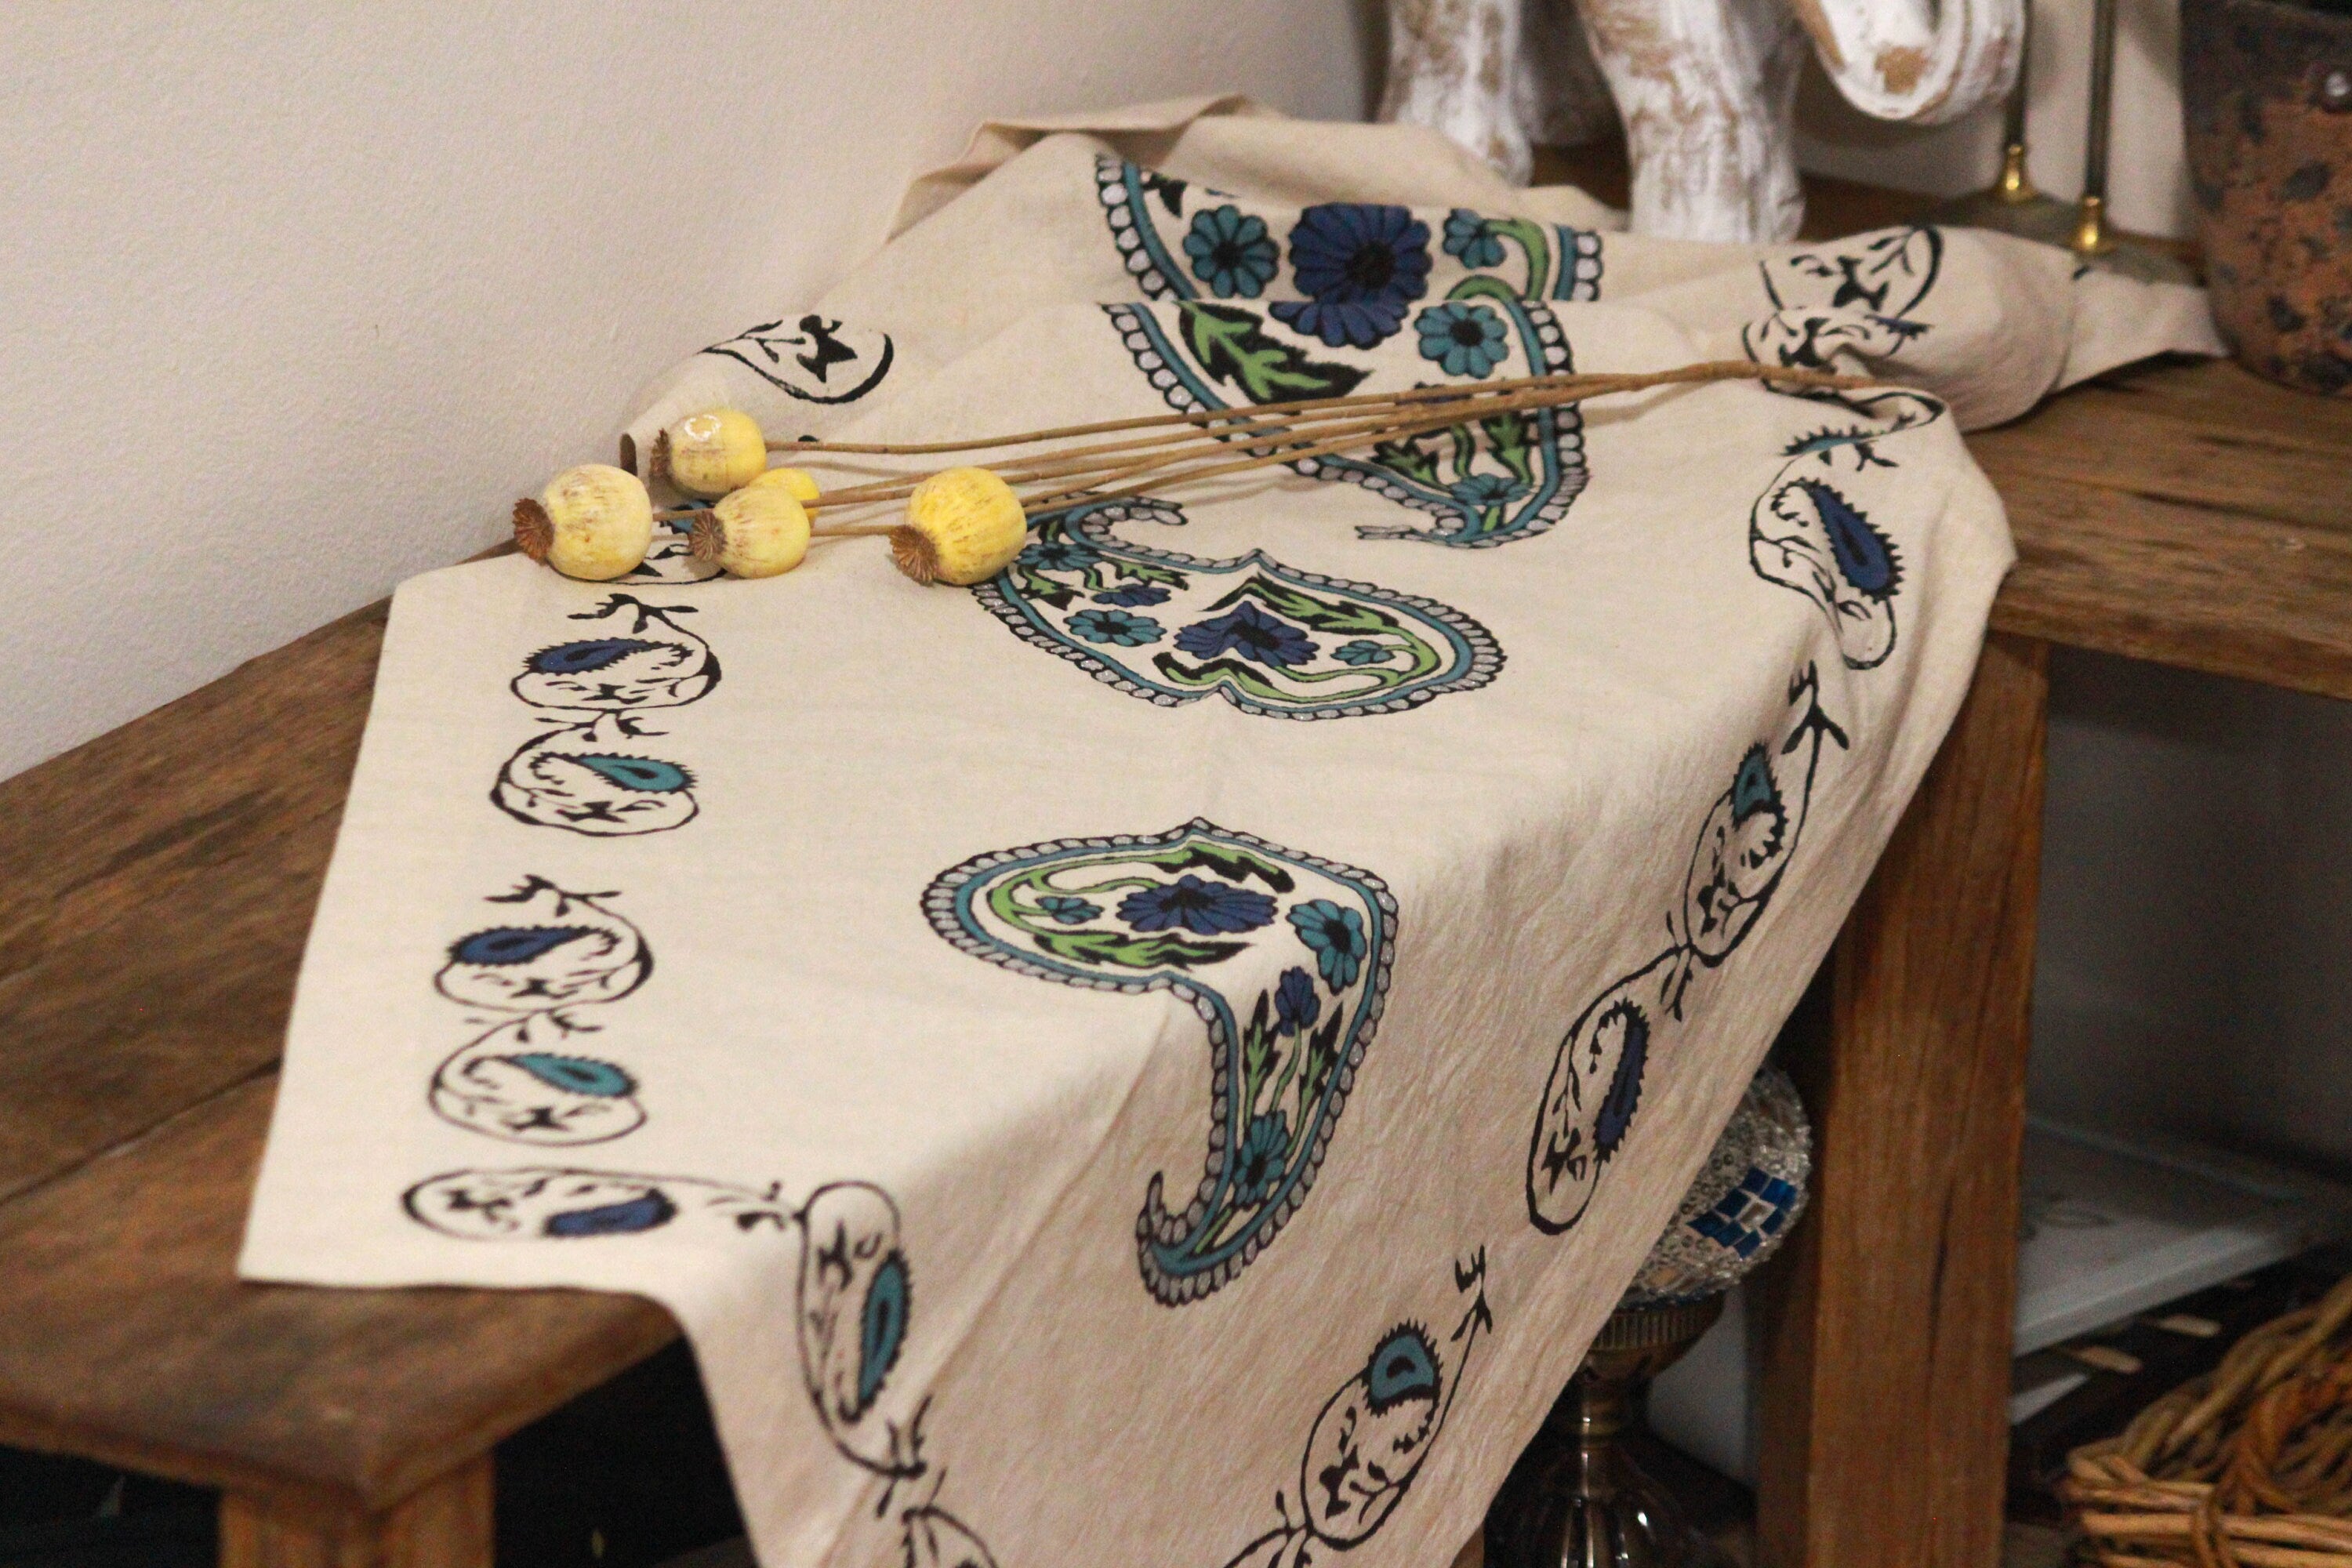 From everyday dining to casual get-together, make a statement with our table runners. With our unique and different table runner patterns